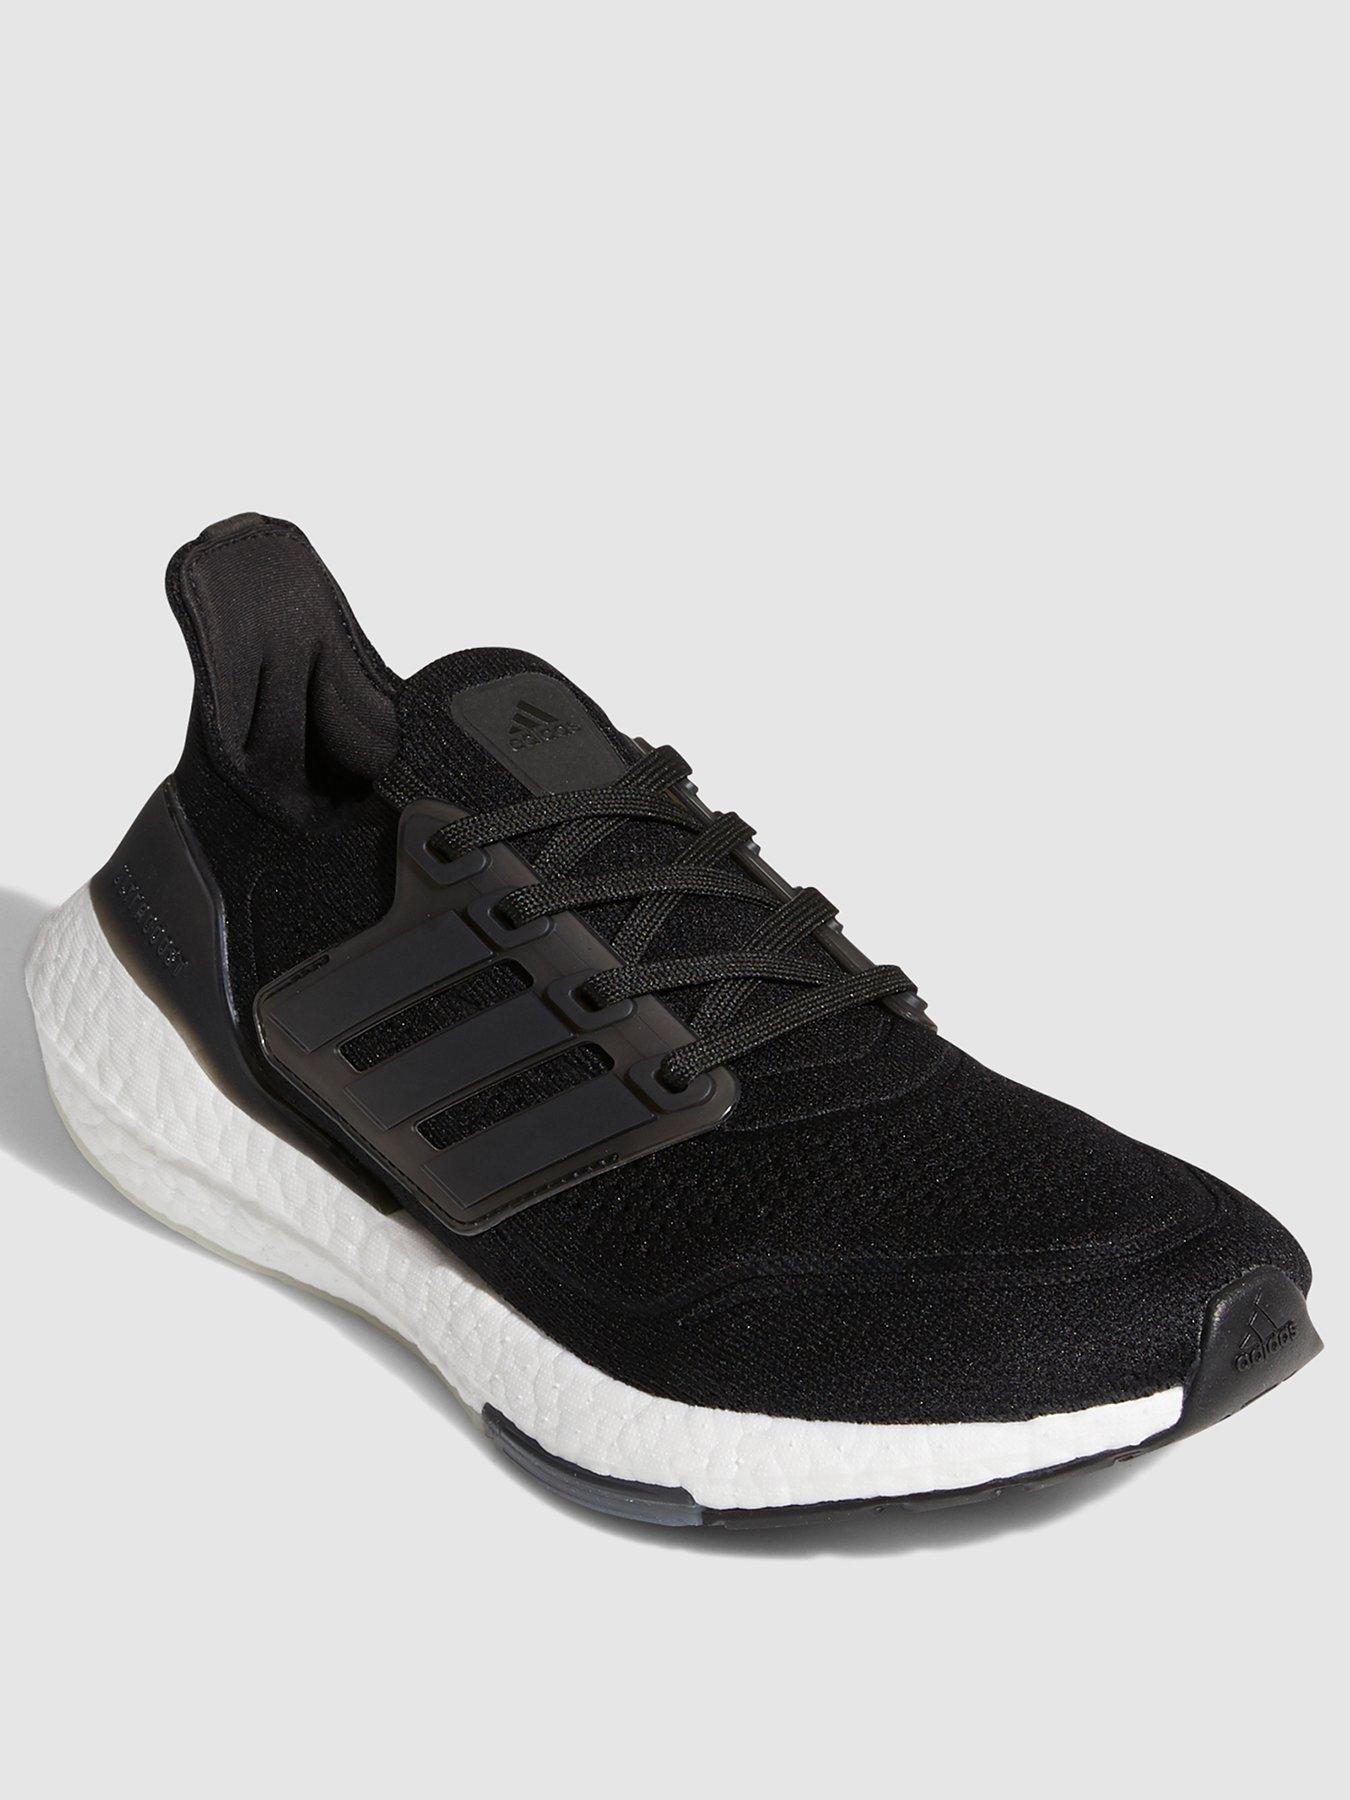 adidas boost women's trainers